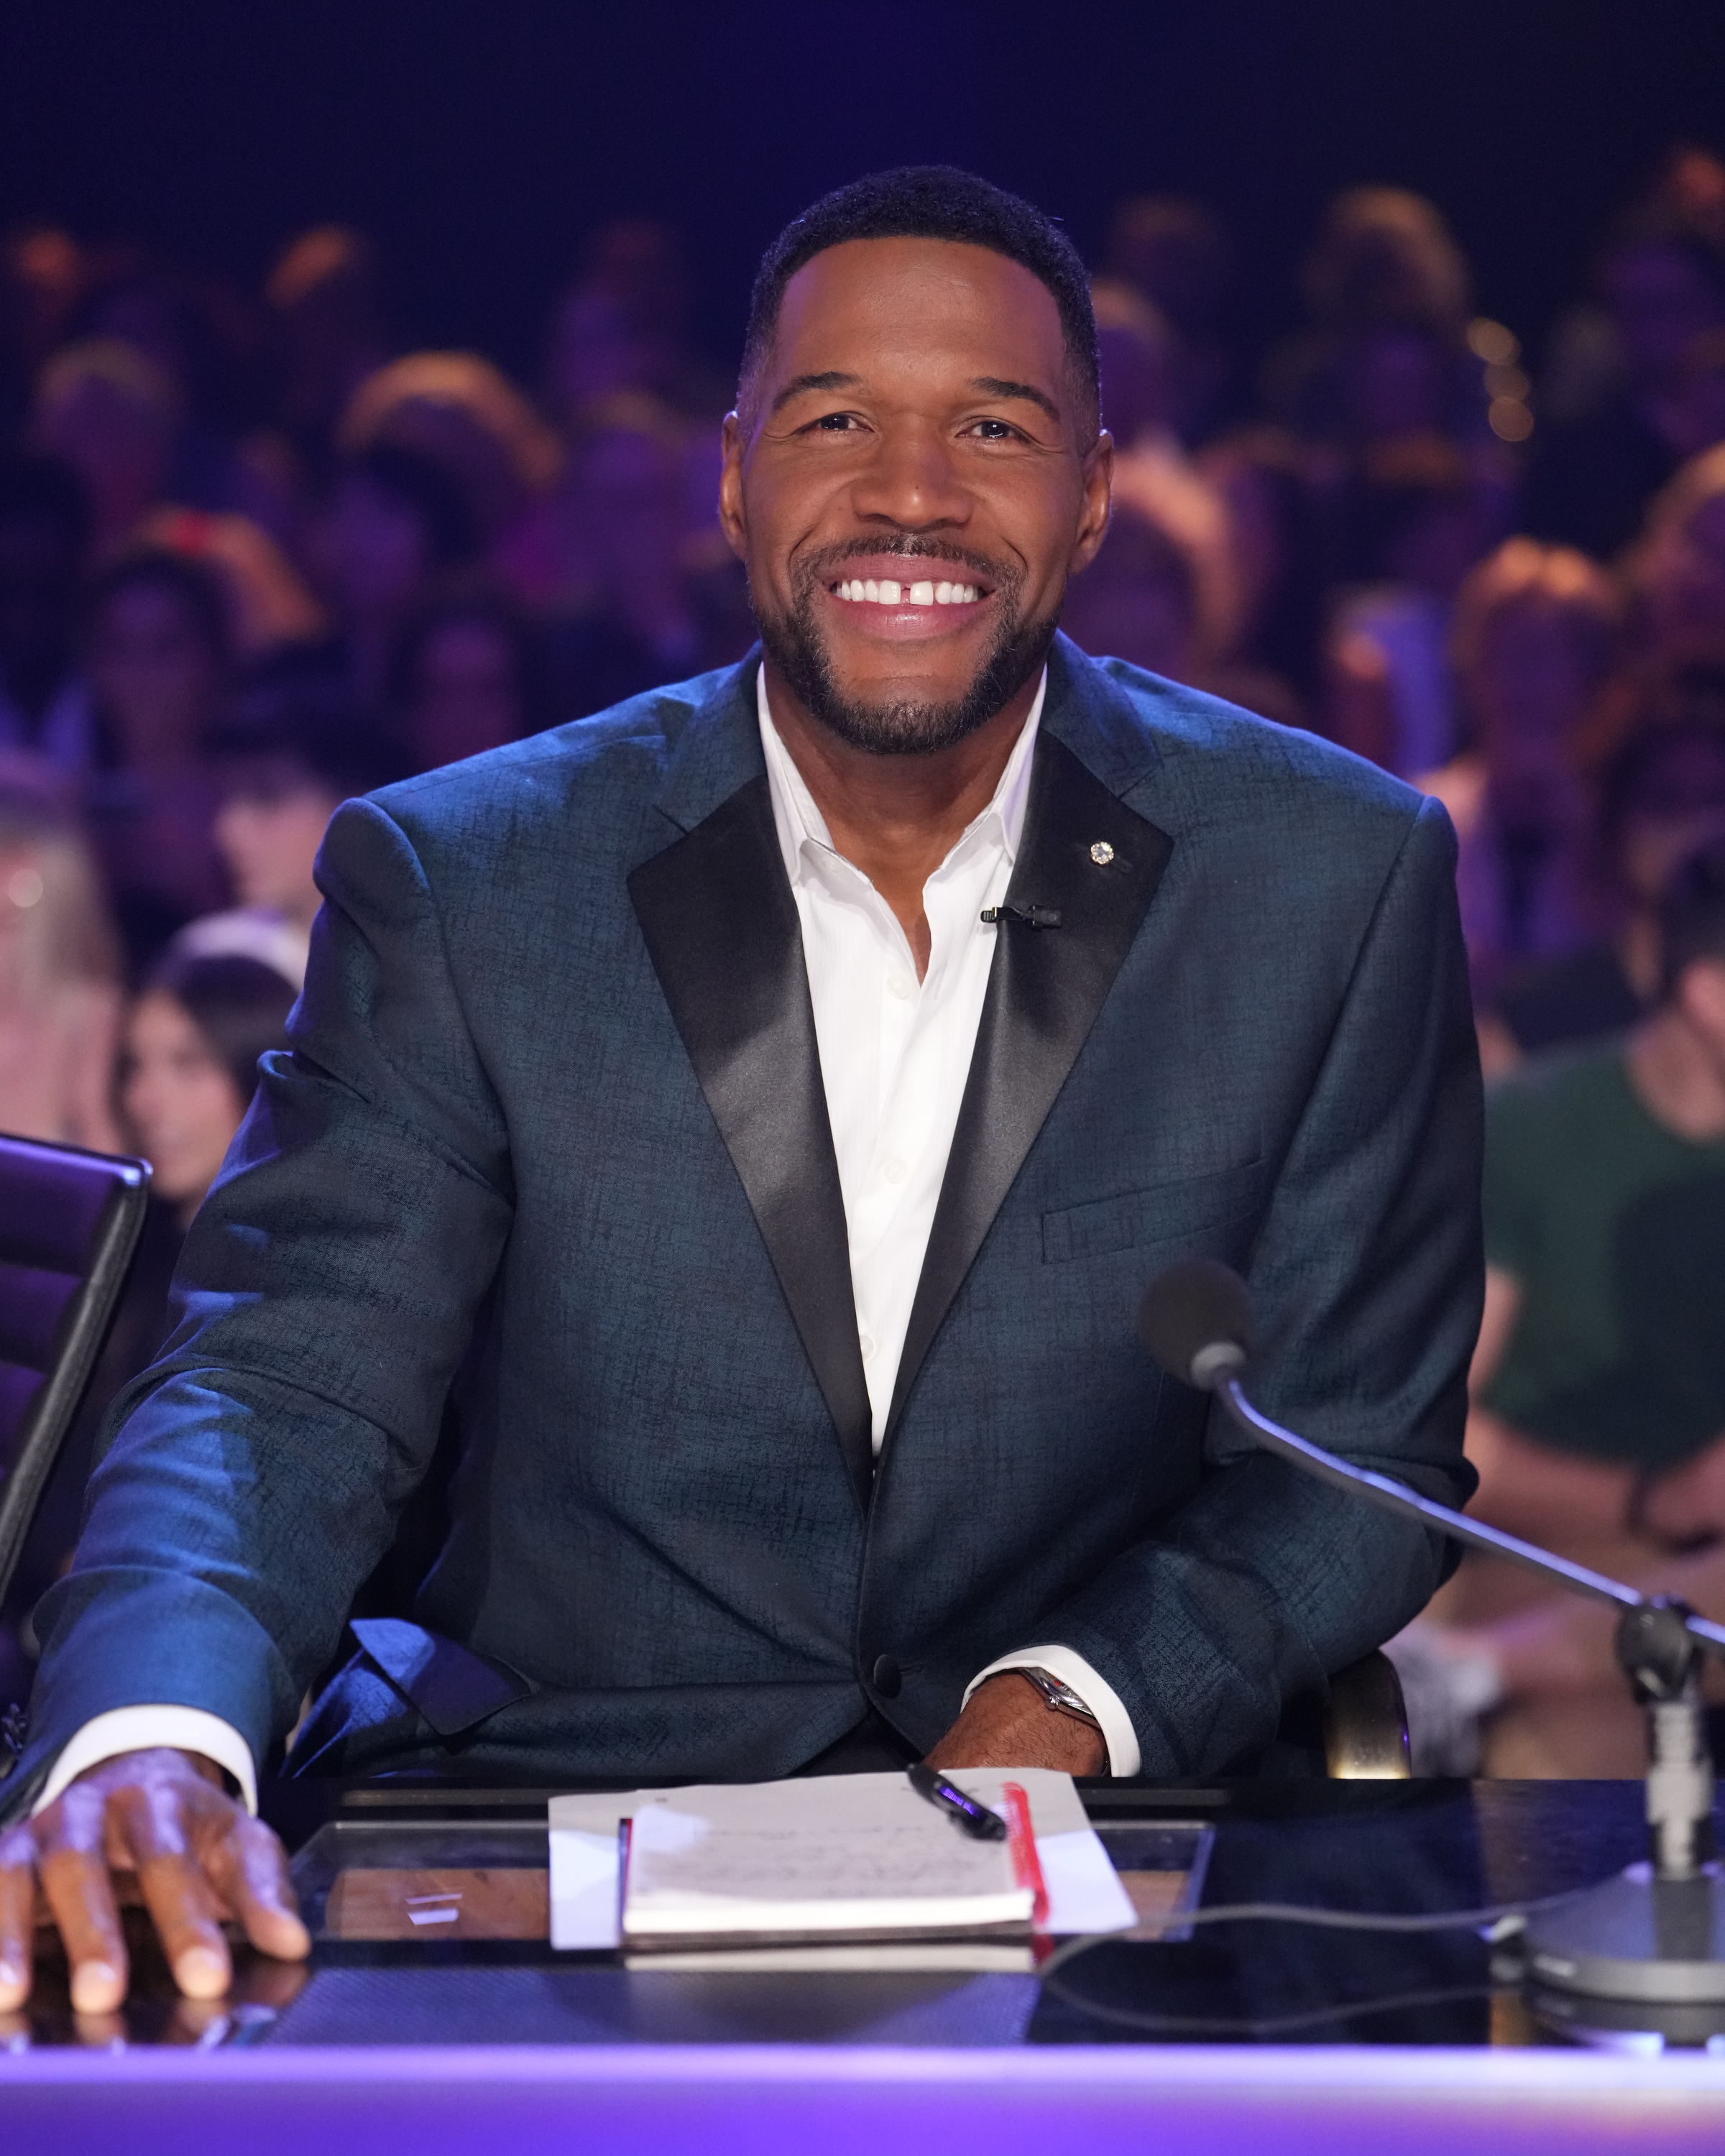 Michael Strahan during an episode of "Dancing with the Stars" | Source: Getty Images